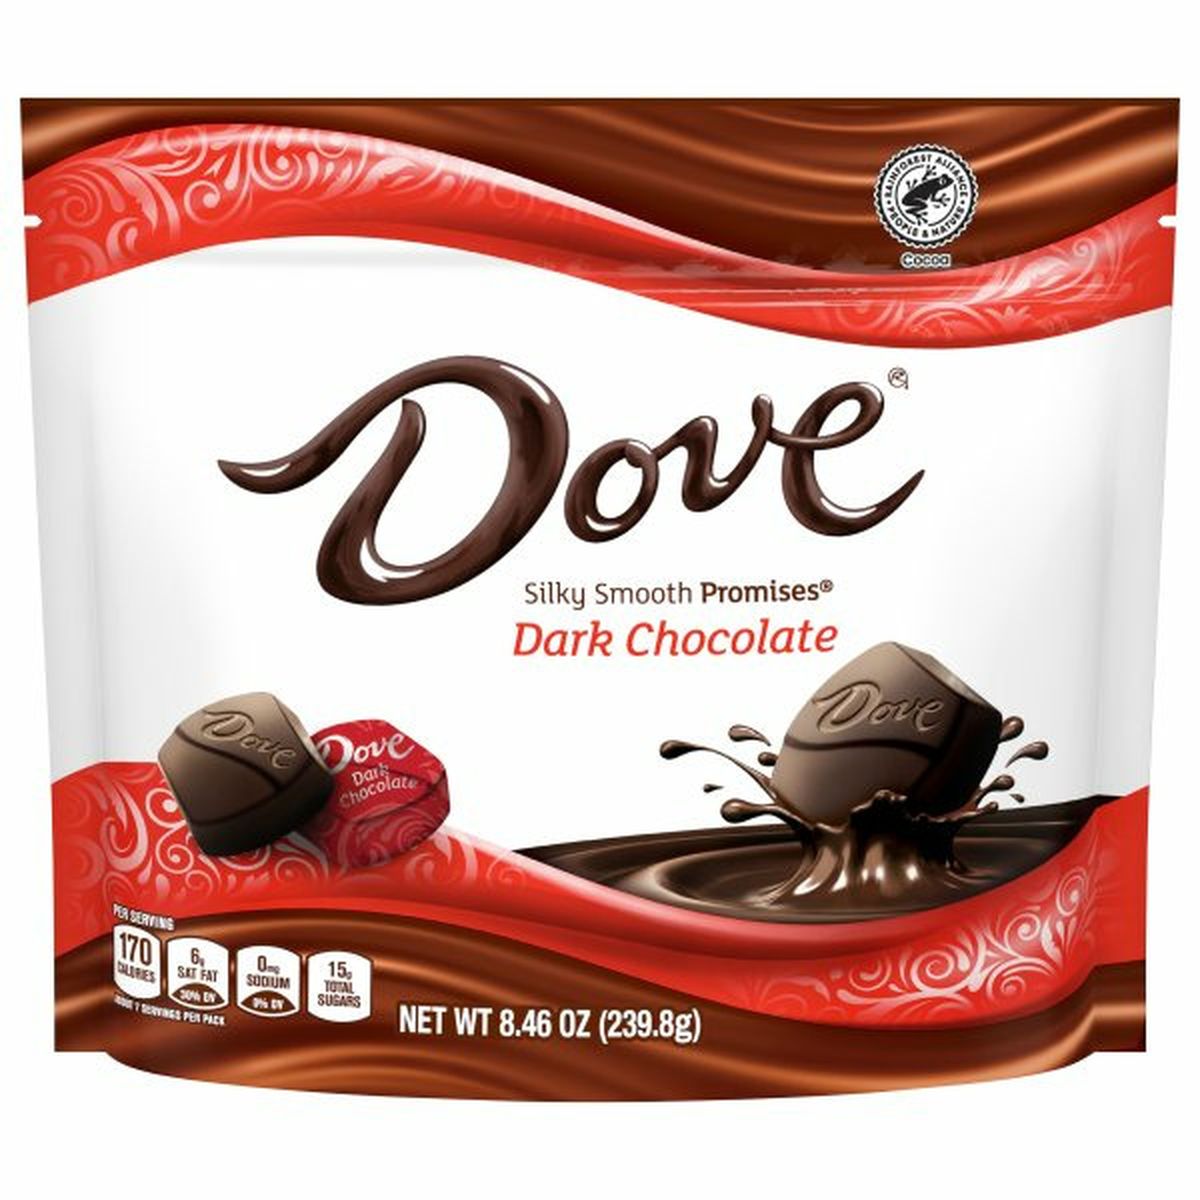 Calories in Dove Silky Smooth Promises Candy, Dark Chocolate